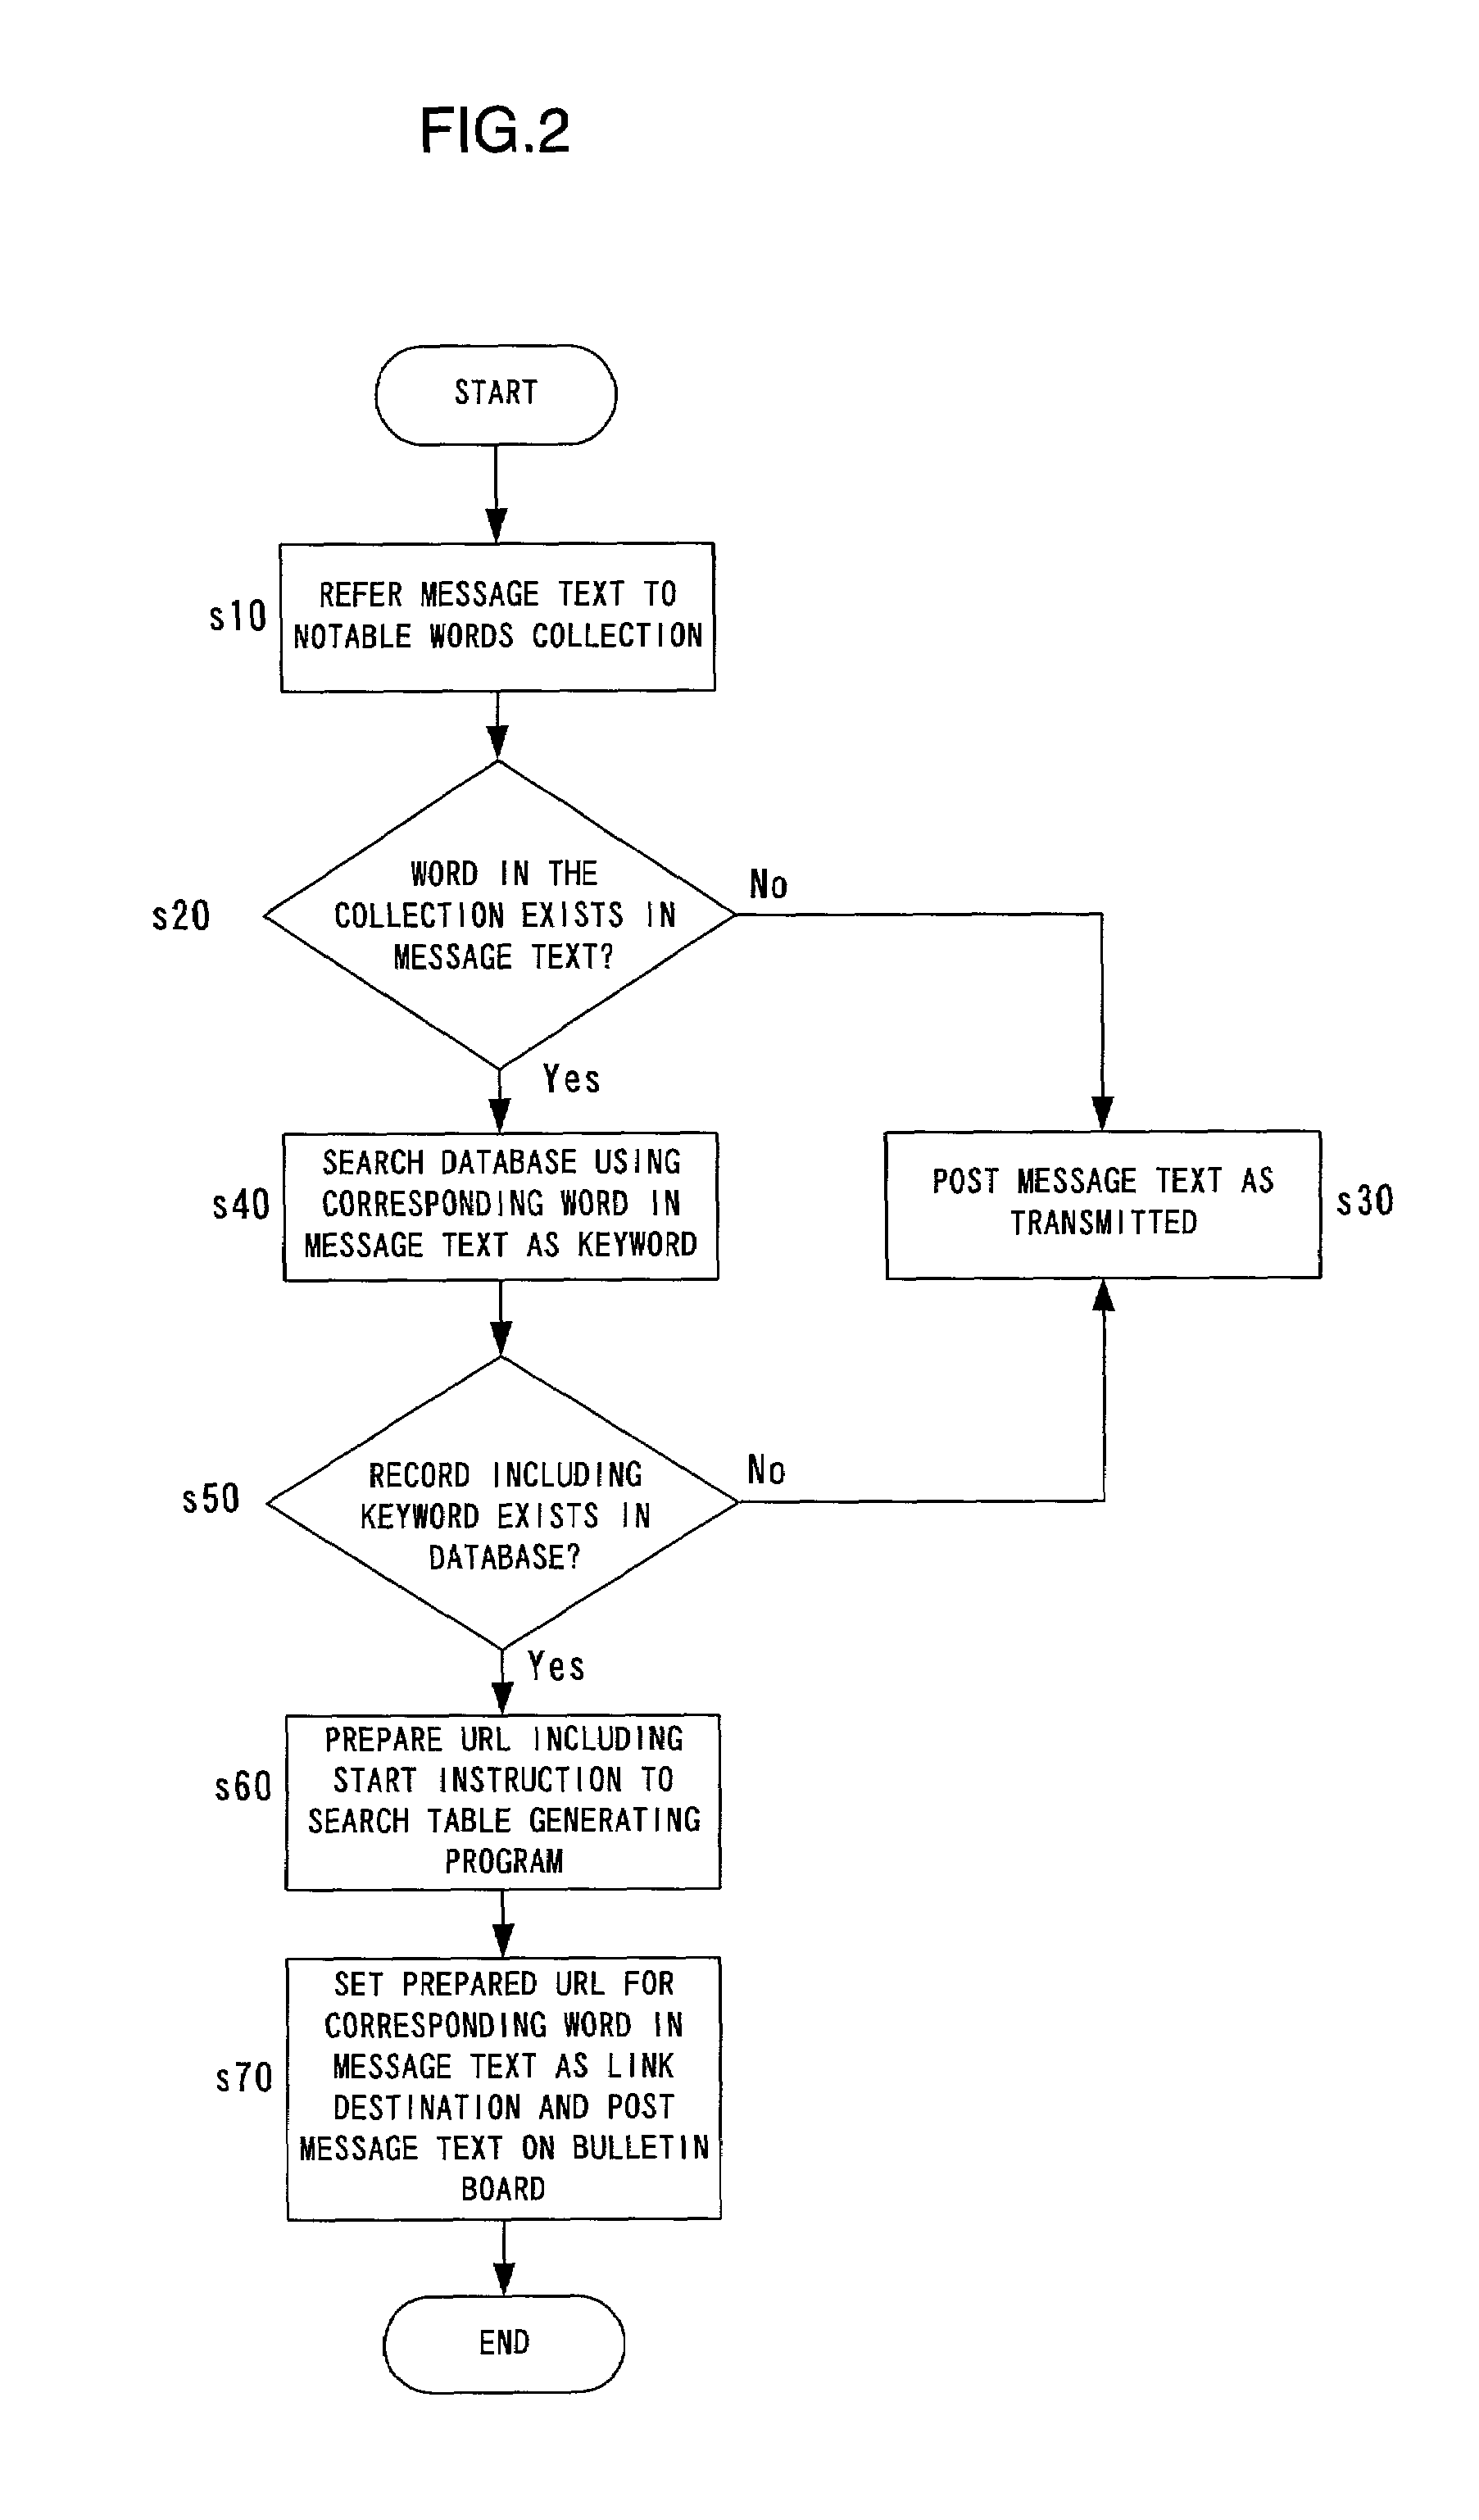 Electronic bulletin board system and mail server